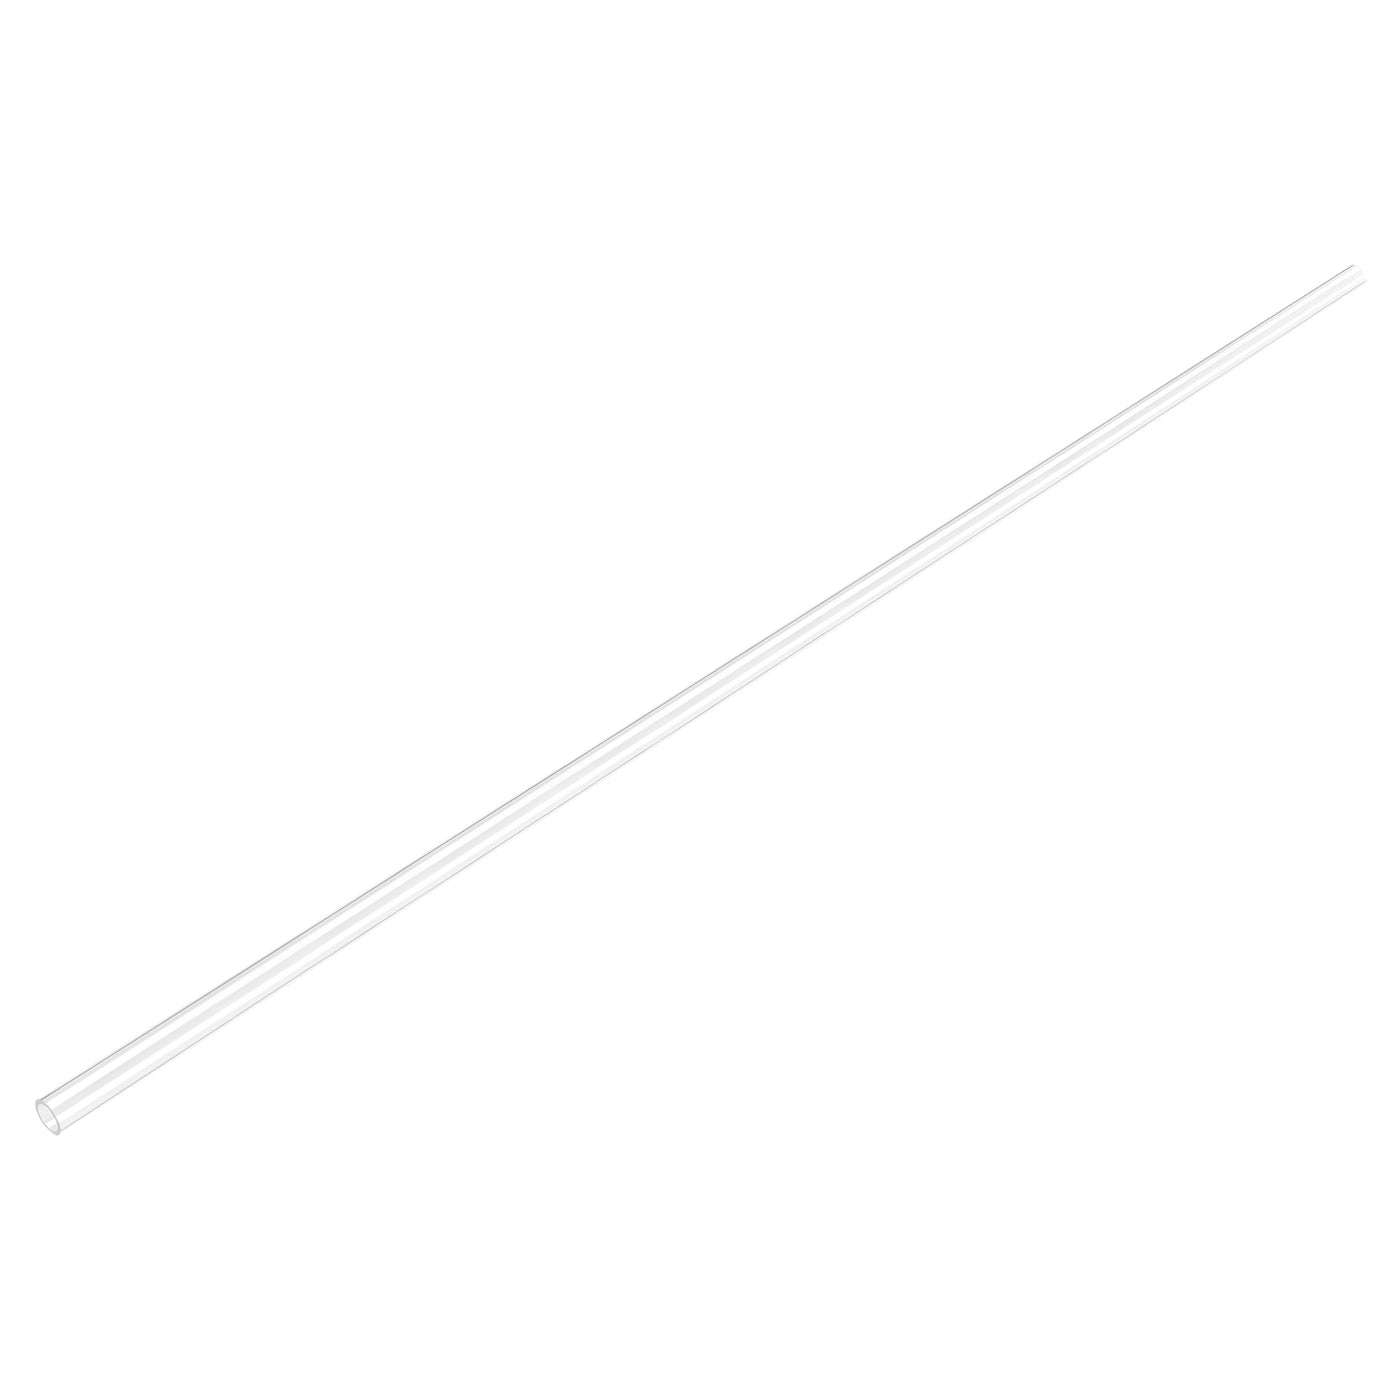 Uxcell Uxcell PC Rigid Round Clear Tubing 22mm(0.86 Inch)IDx25mm(0.98 Inch)ODx610mm(2Ft) Length Plastic Tube 2pcs